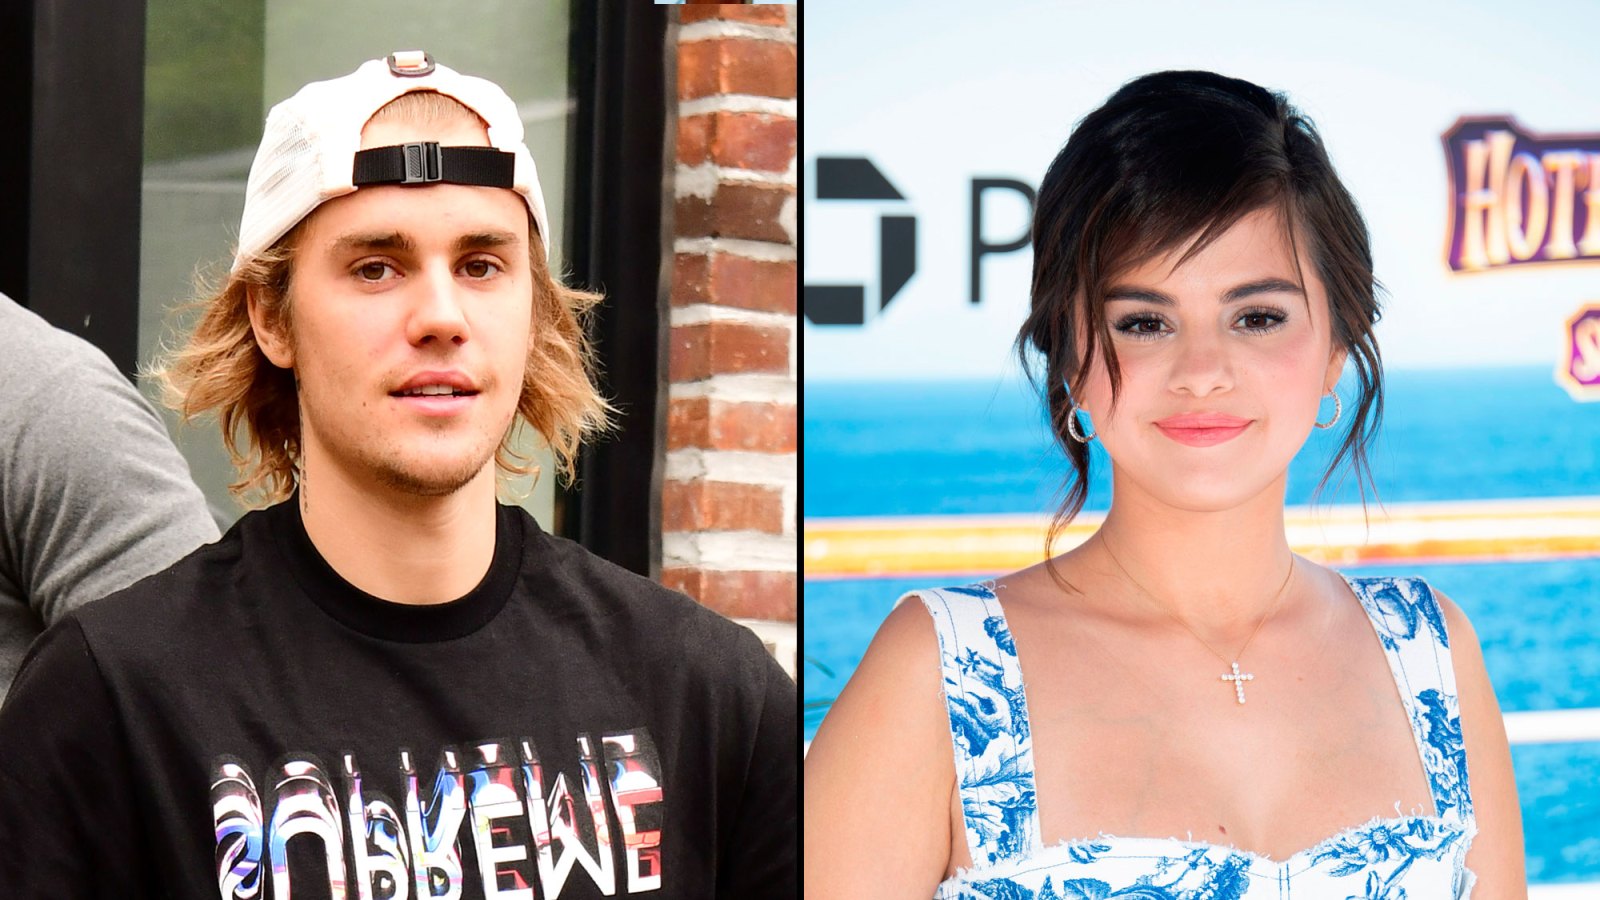 Justin Bieber and Selena Gomez IG Suggests he Follow her